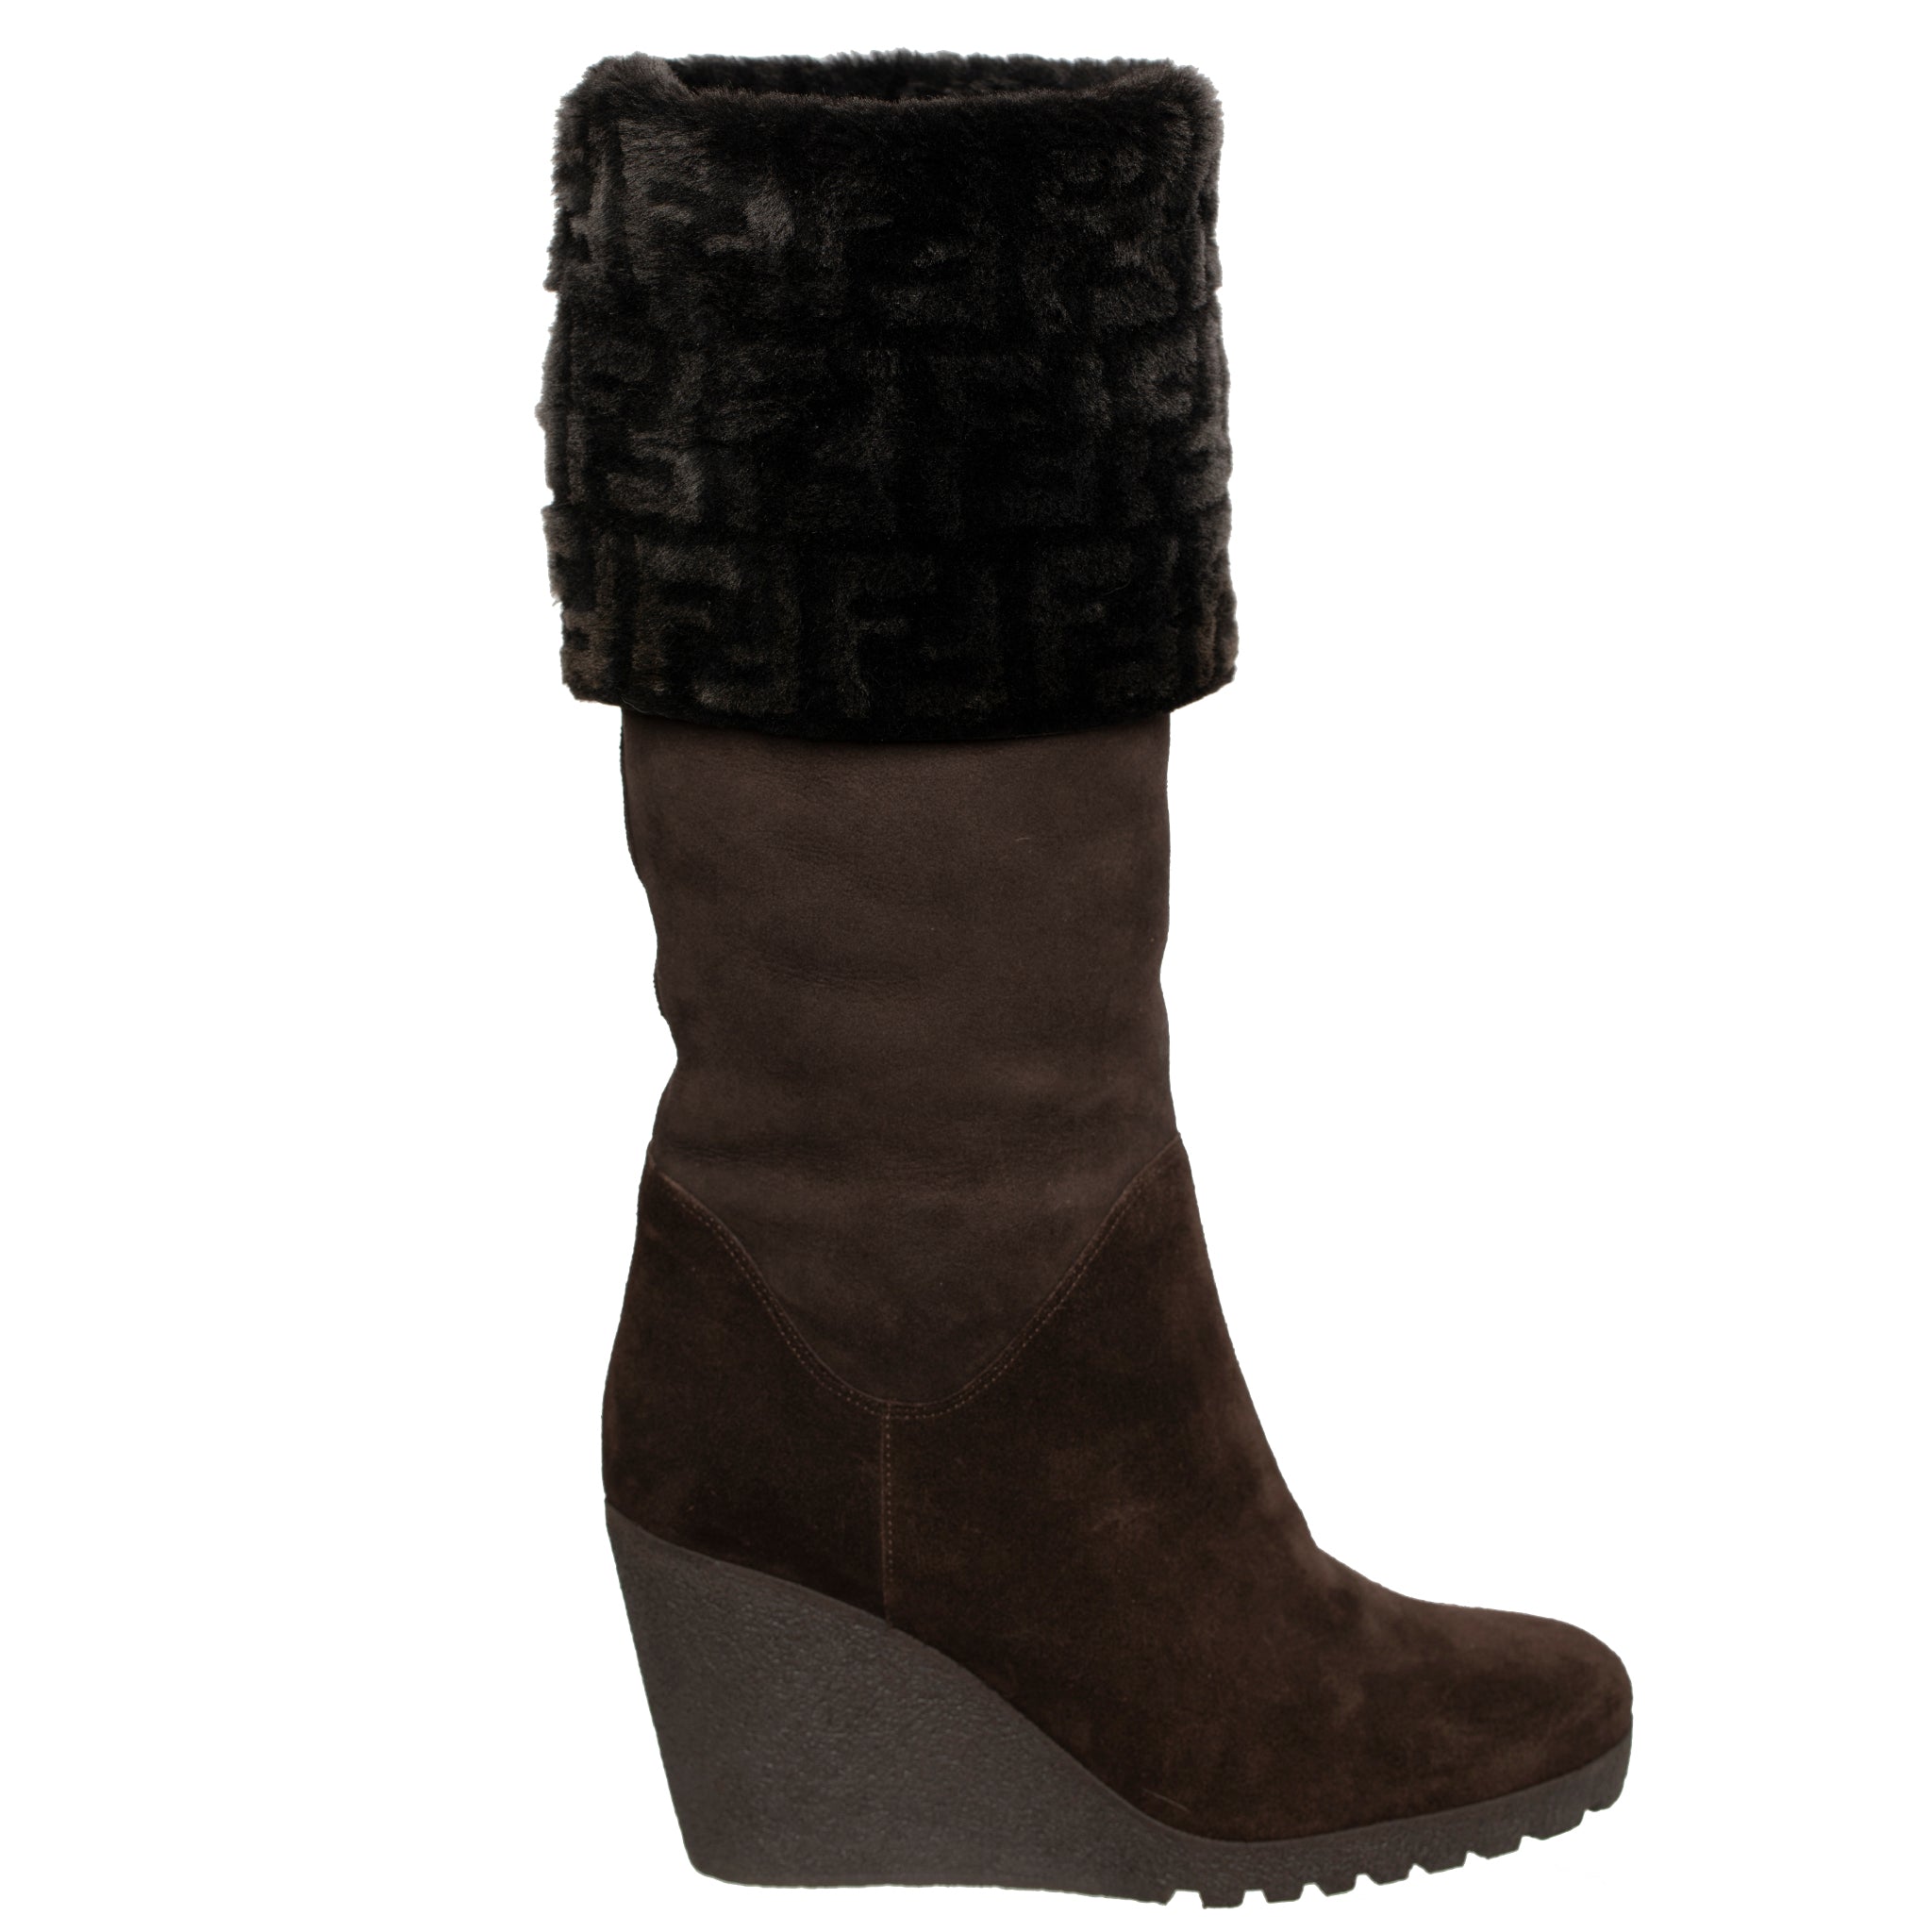 FENDI BROWN SUEDE AND RABBIT FF LOGO WEDGE BOOTS 38 IT - On Repeat